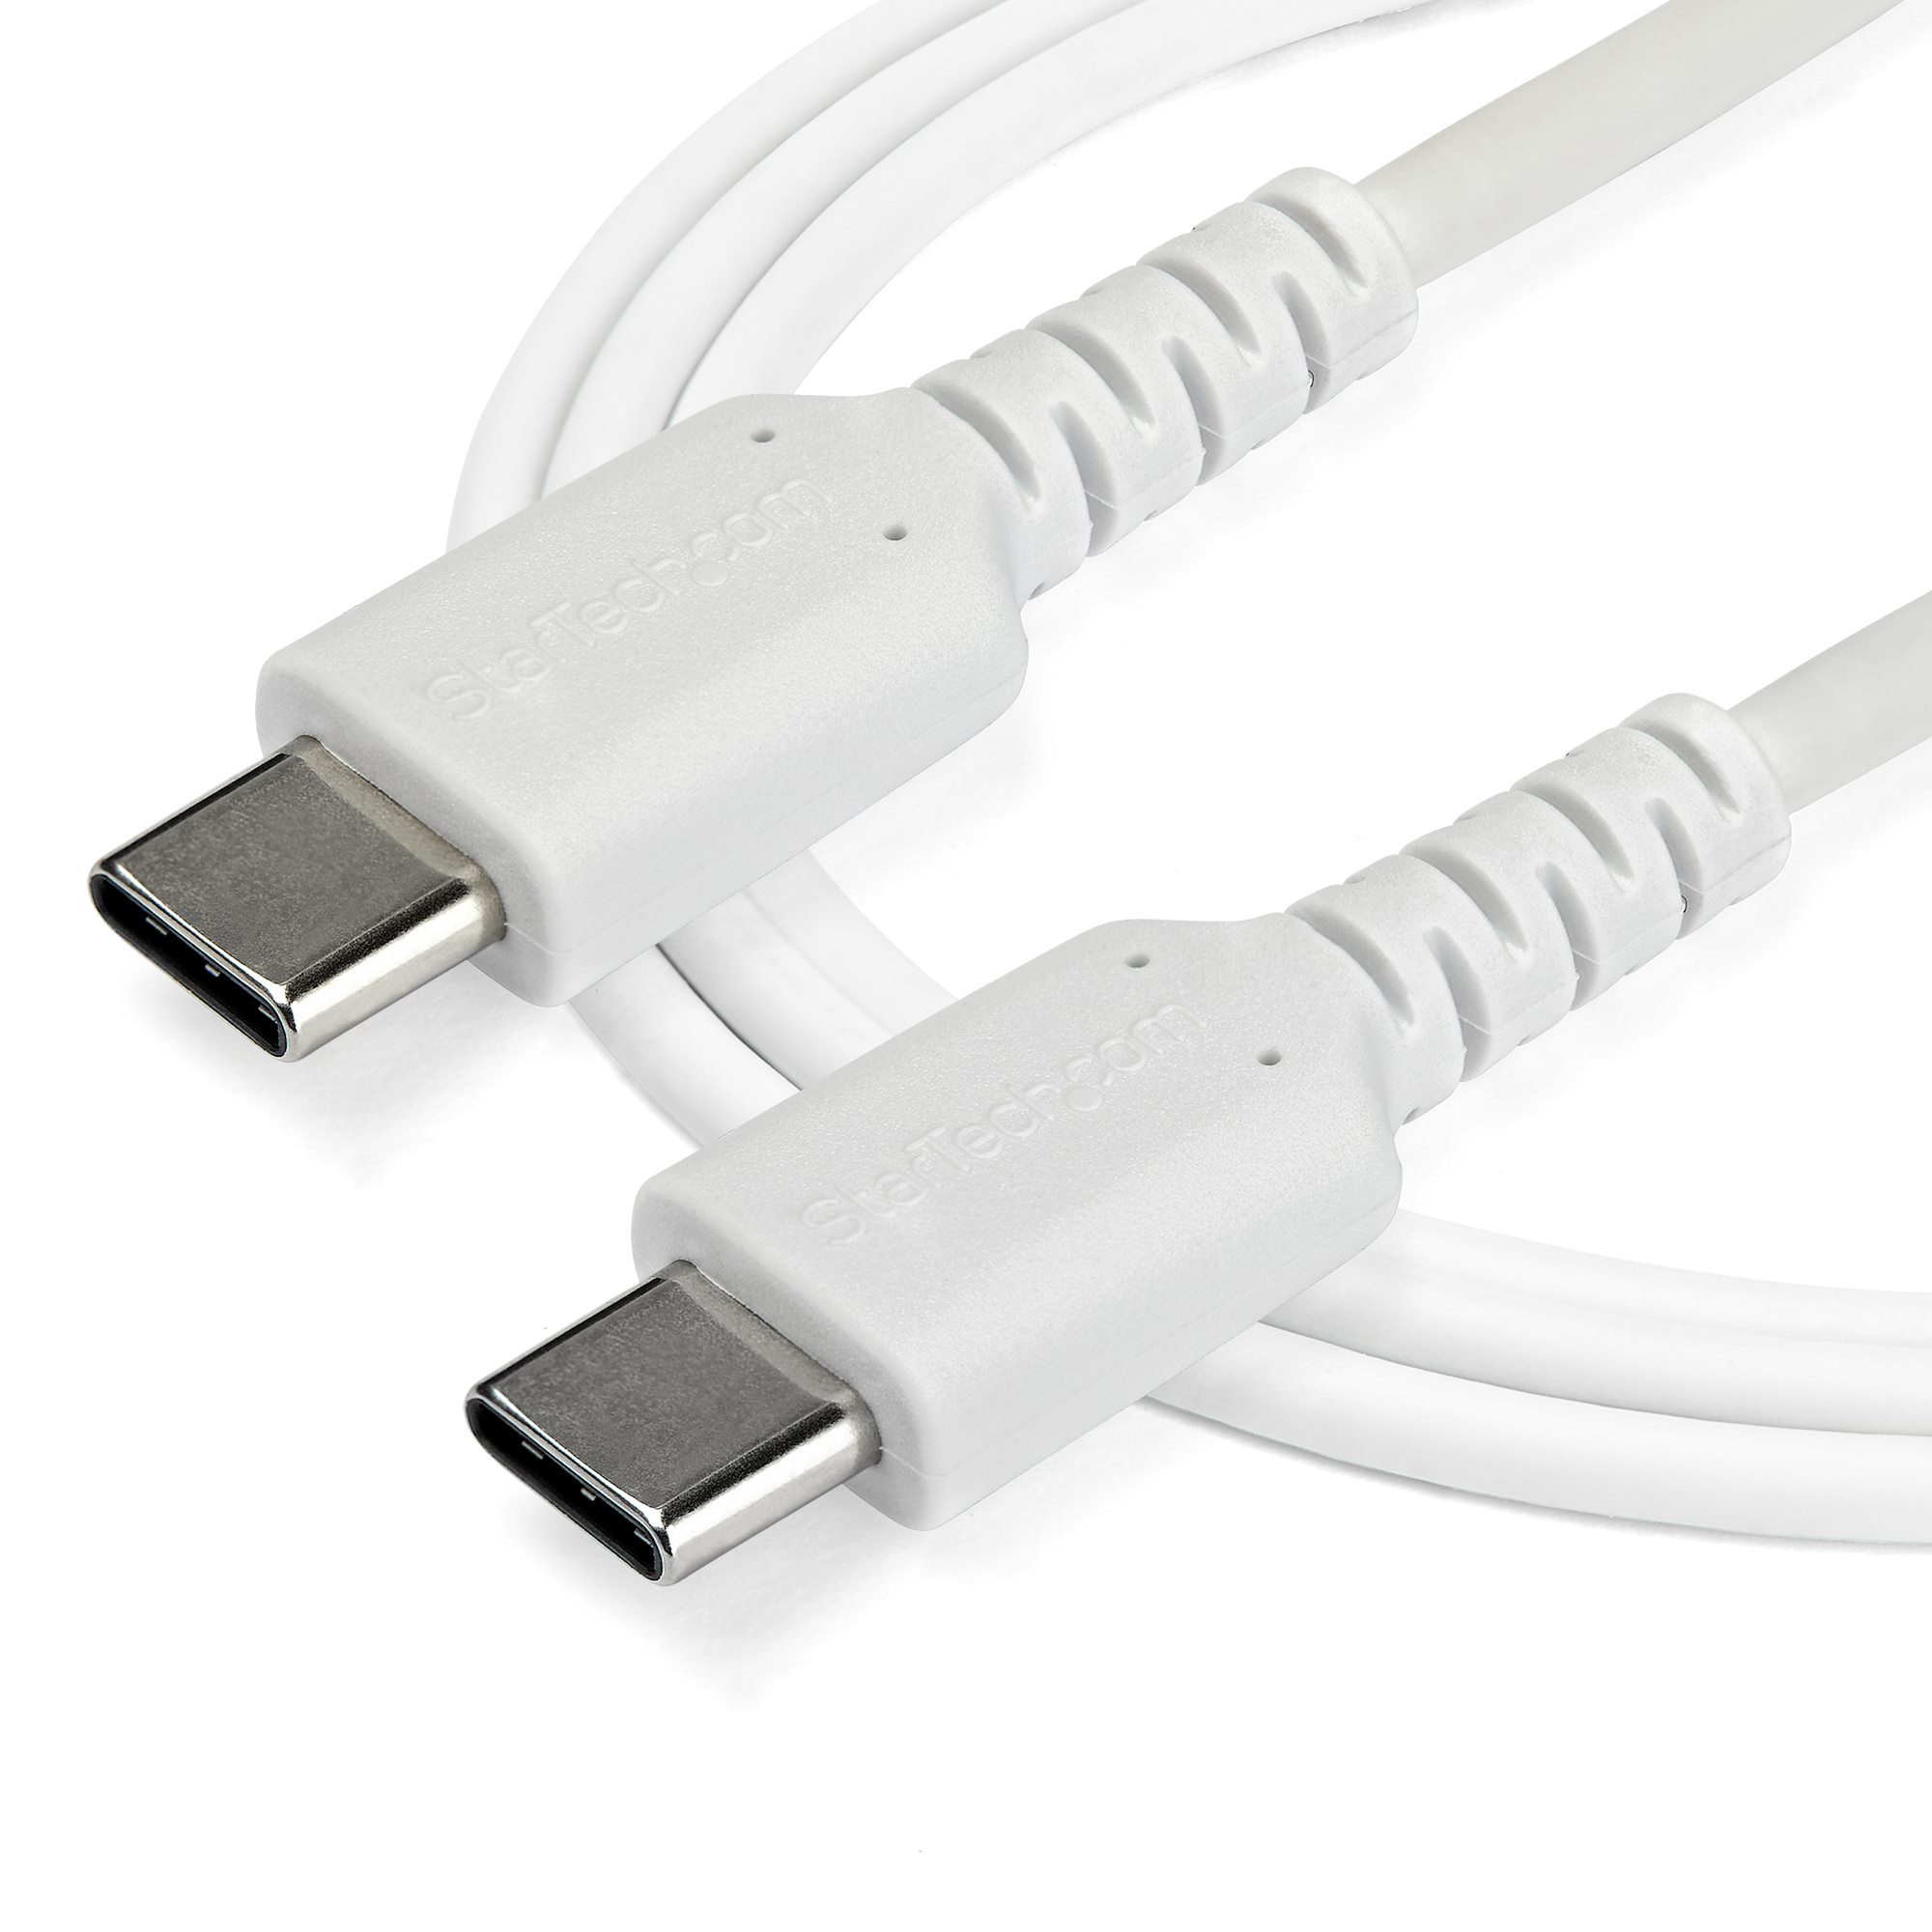 2m USB C Charging Cable Durable Cord 60W - USB-C Cables